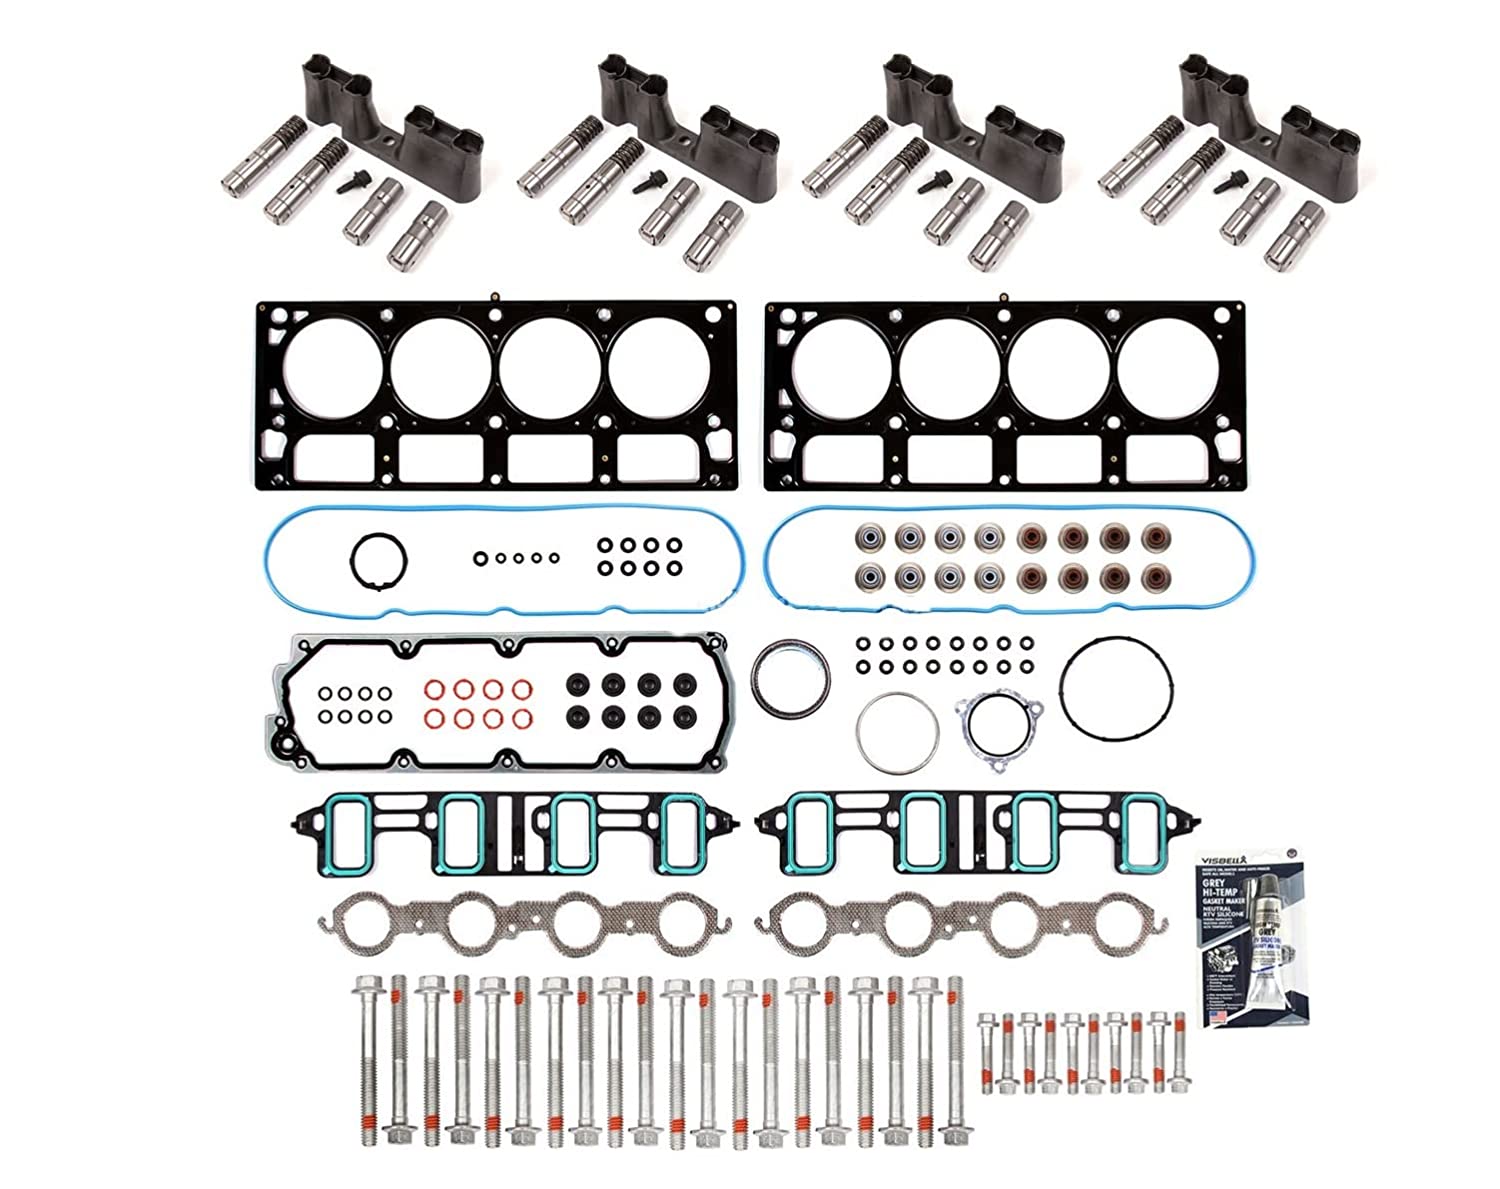 6.0 6.2 AFM Lifter Replacement Kit with Head Gasket Set Head Bolts Lifters and Guides Compatible with 2007-2015 Chevy GM 6.0L 6.2L LS L92 L76 LZ1 LFA